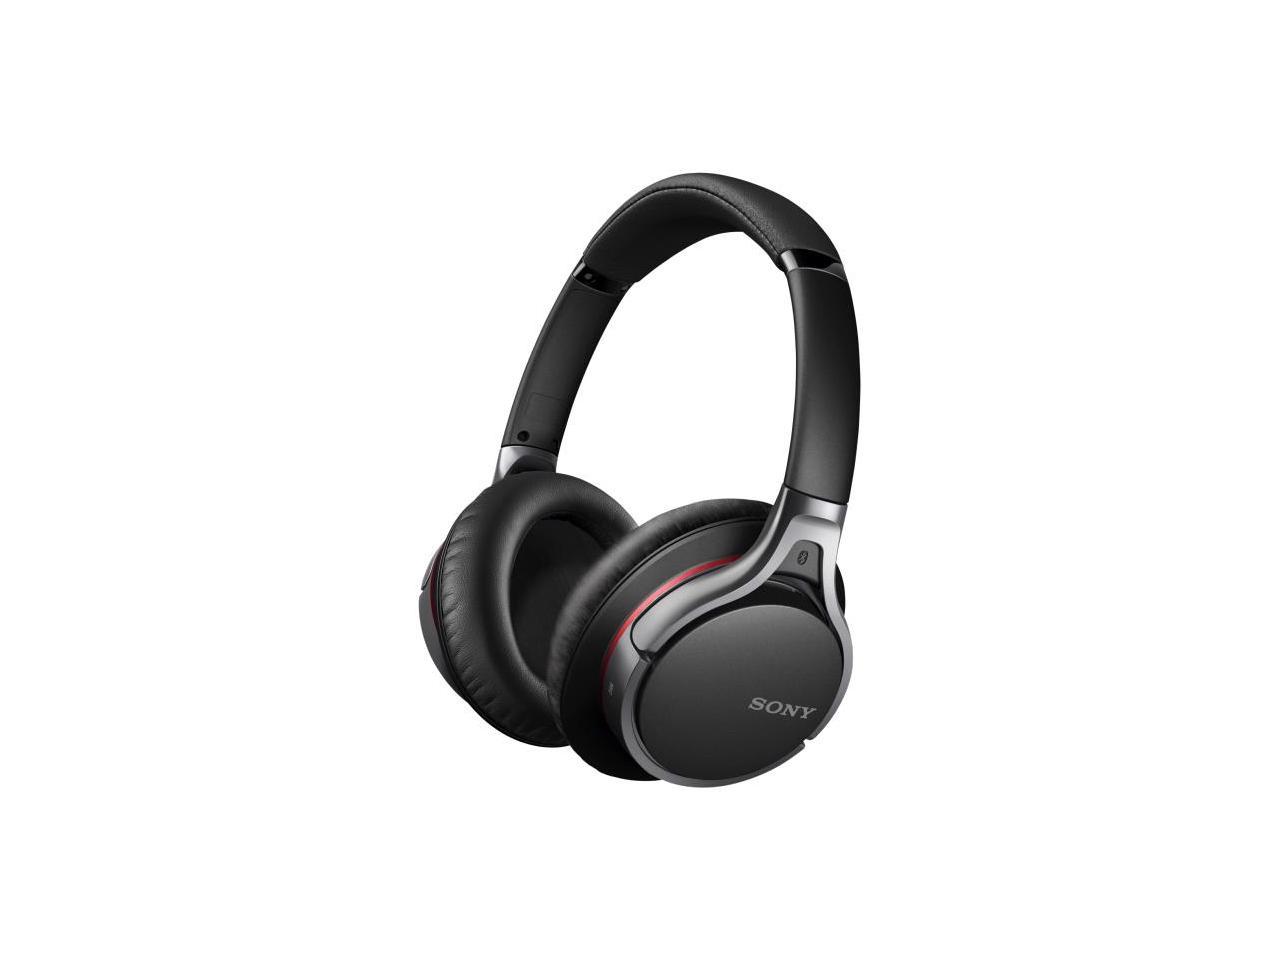 Sony MDR-10RBT Premium Over-Ear Wireless Bluetooth Noise-Cancelling Headphones (Black)